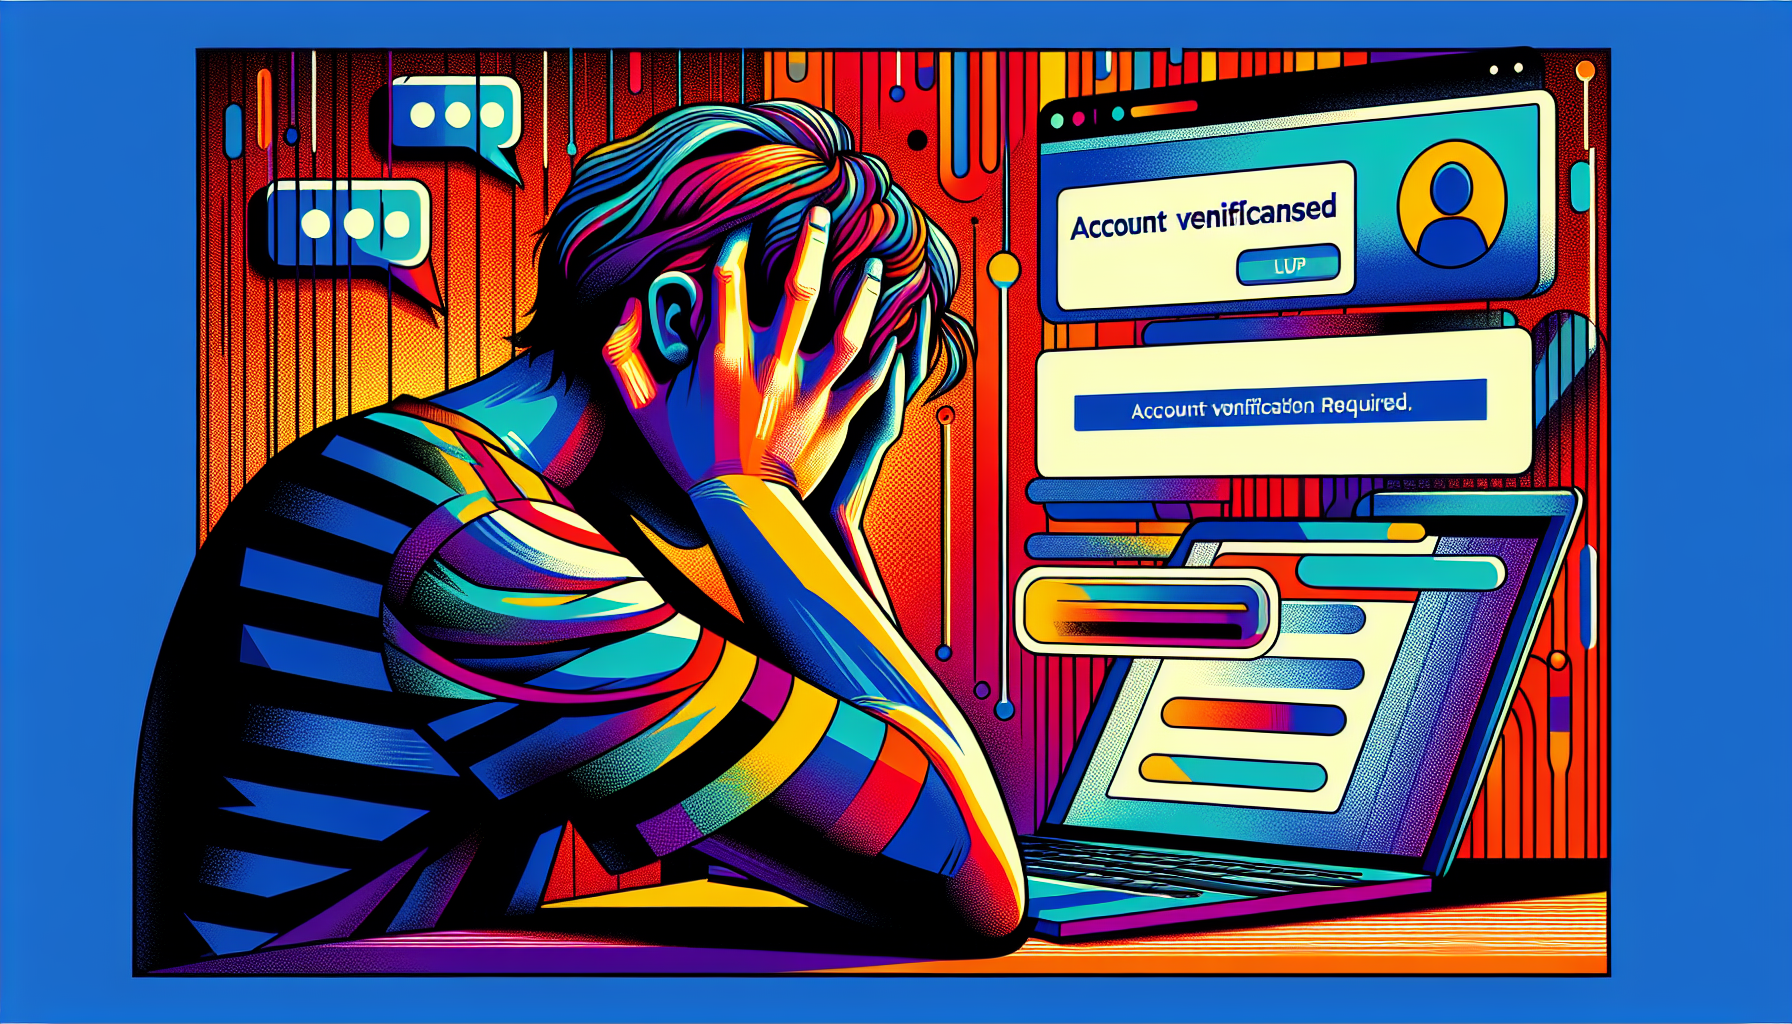 A frustrated user with their head in their hands, staring at a laptop screen with a large pop-up message saying Account Verification Required.